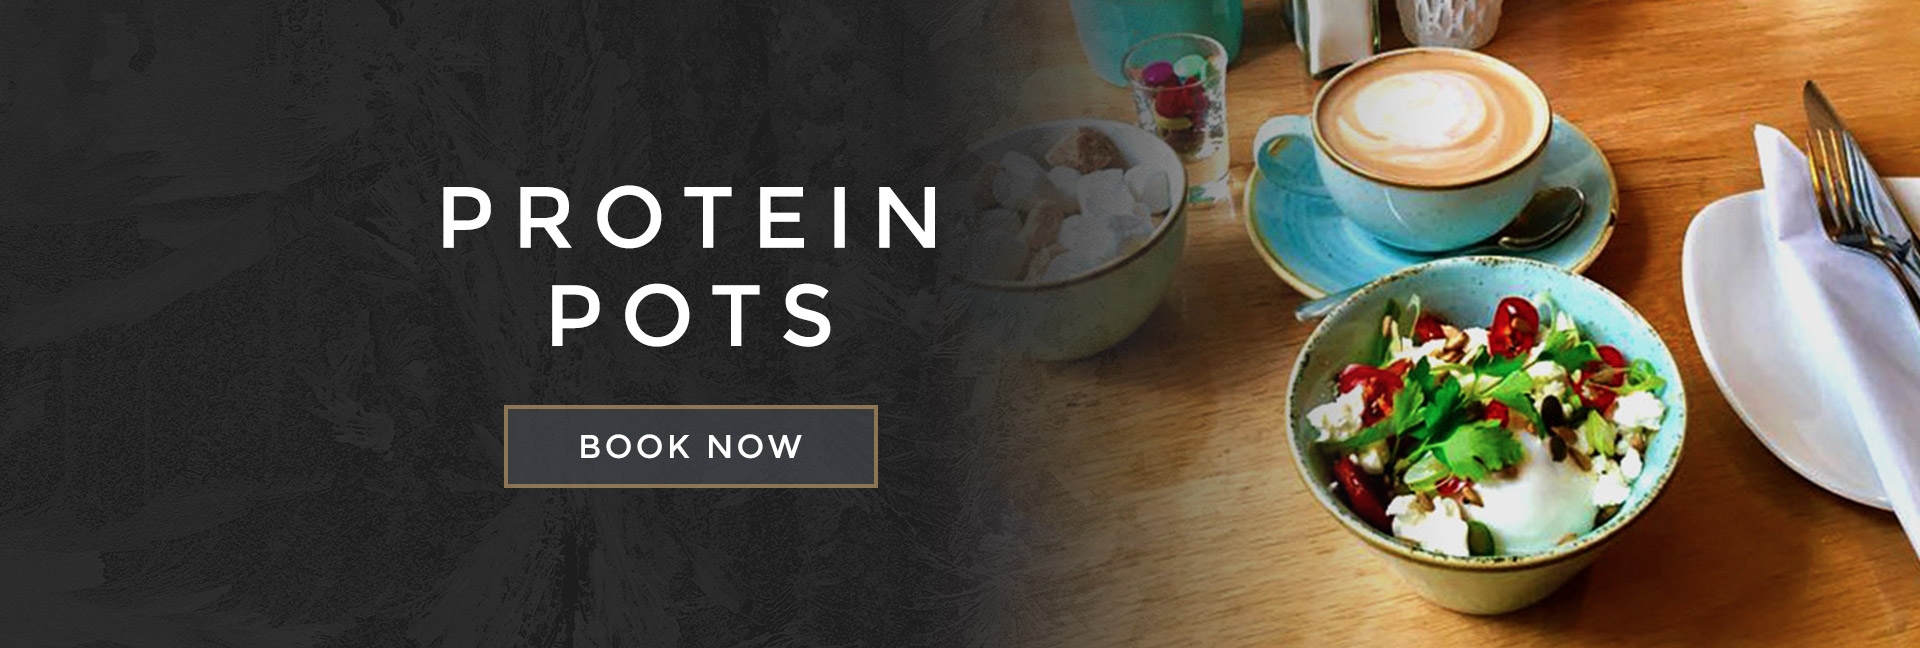 Protein pots at All Bar One Cambridge - Book your table